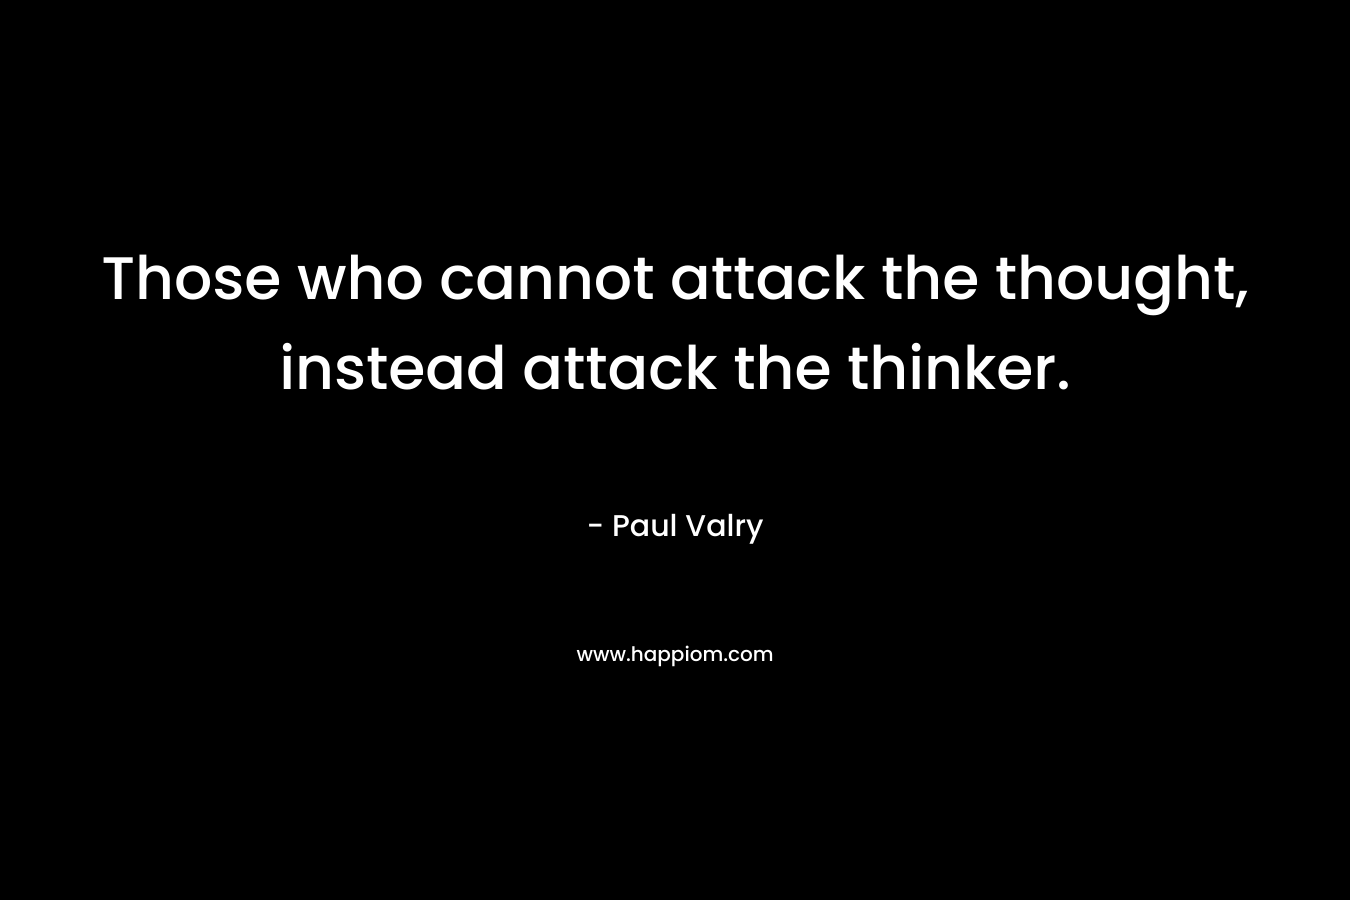 Those who cannot attack the thought, instead attack the thinker. – Paul Valry